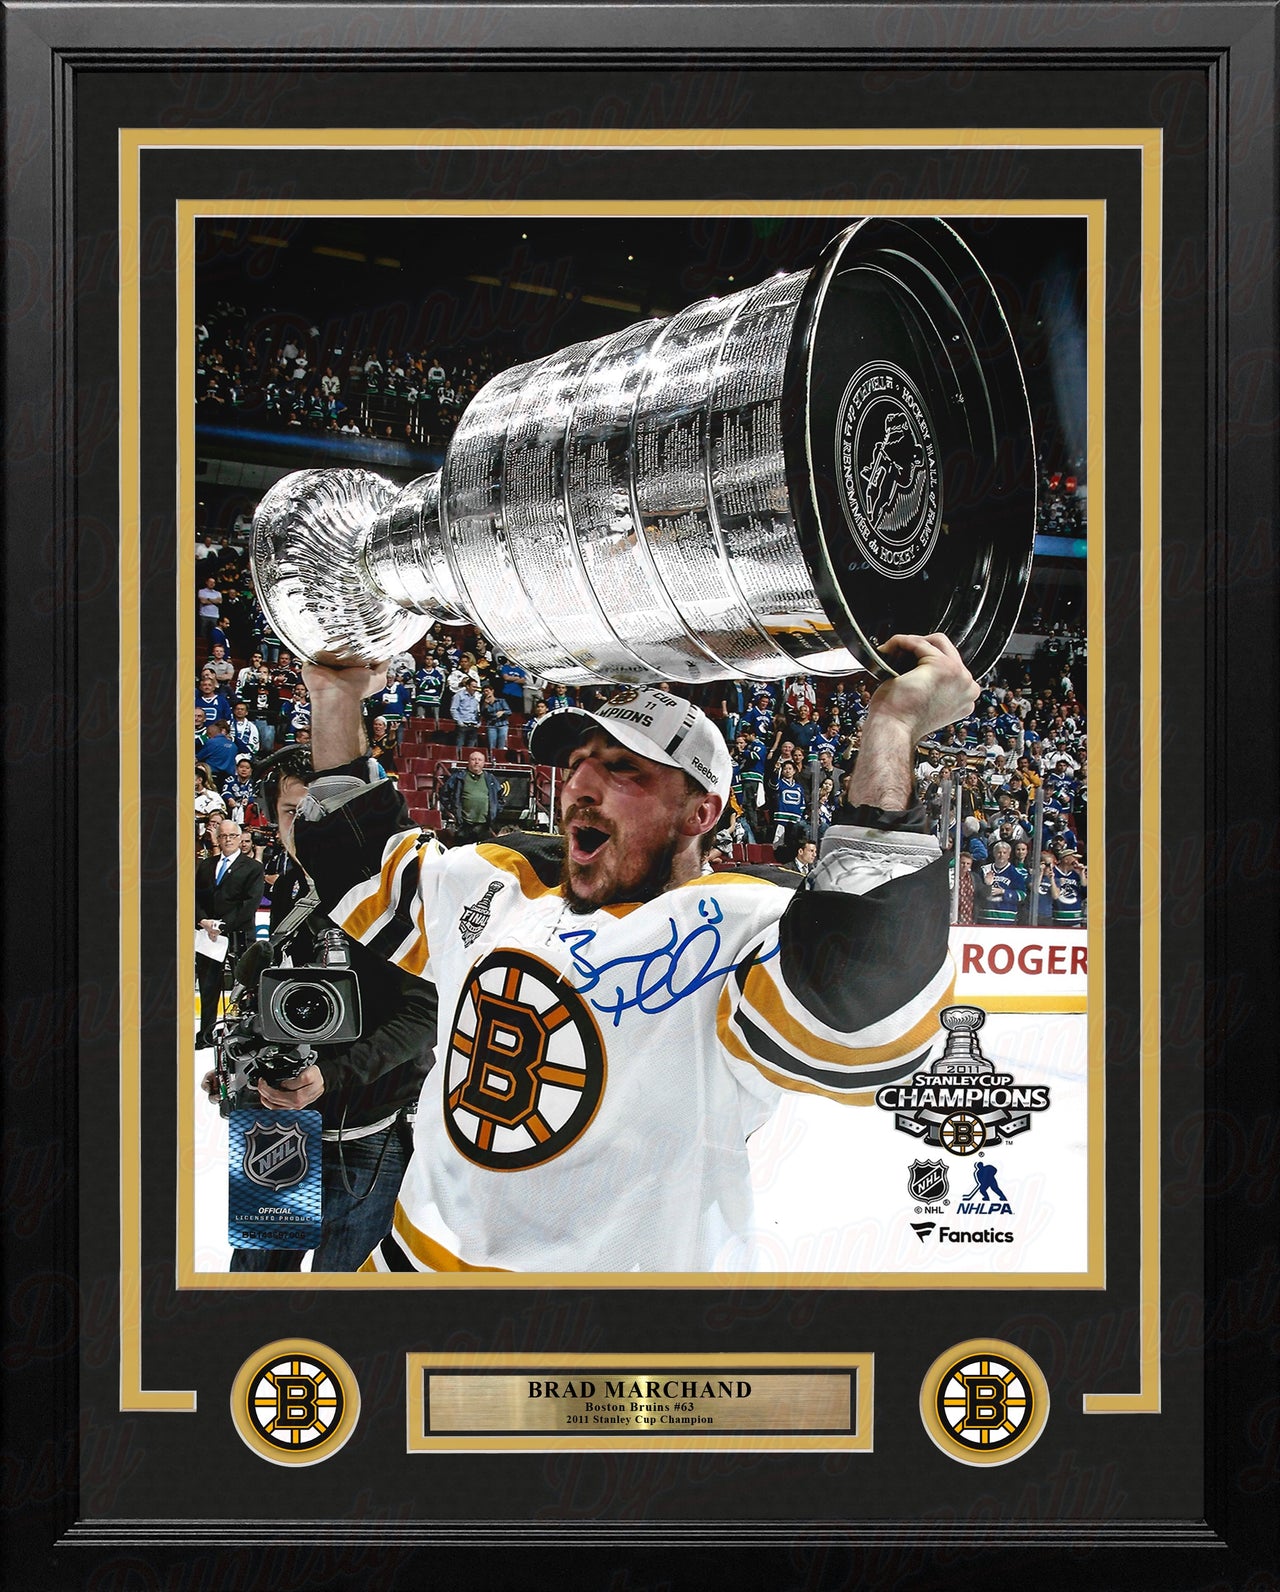 Brad Marchand 2011 Stanley Cup Boston Bruins Autographed 11" x 14" Framed Hockey Photo